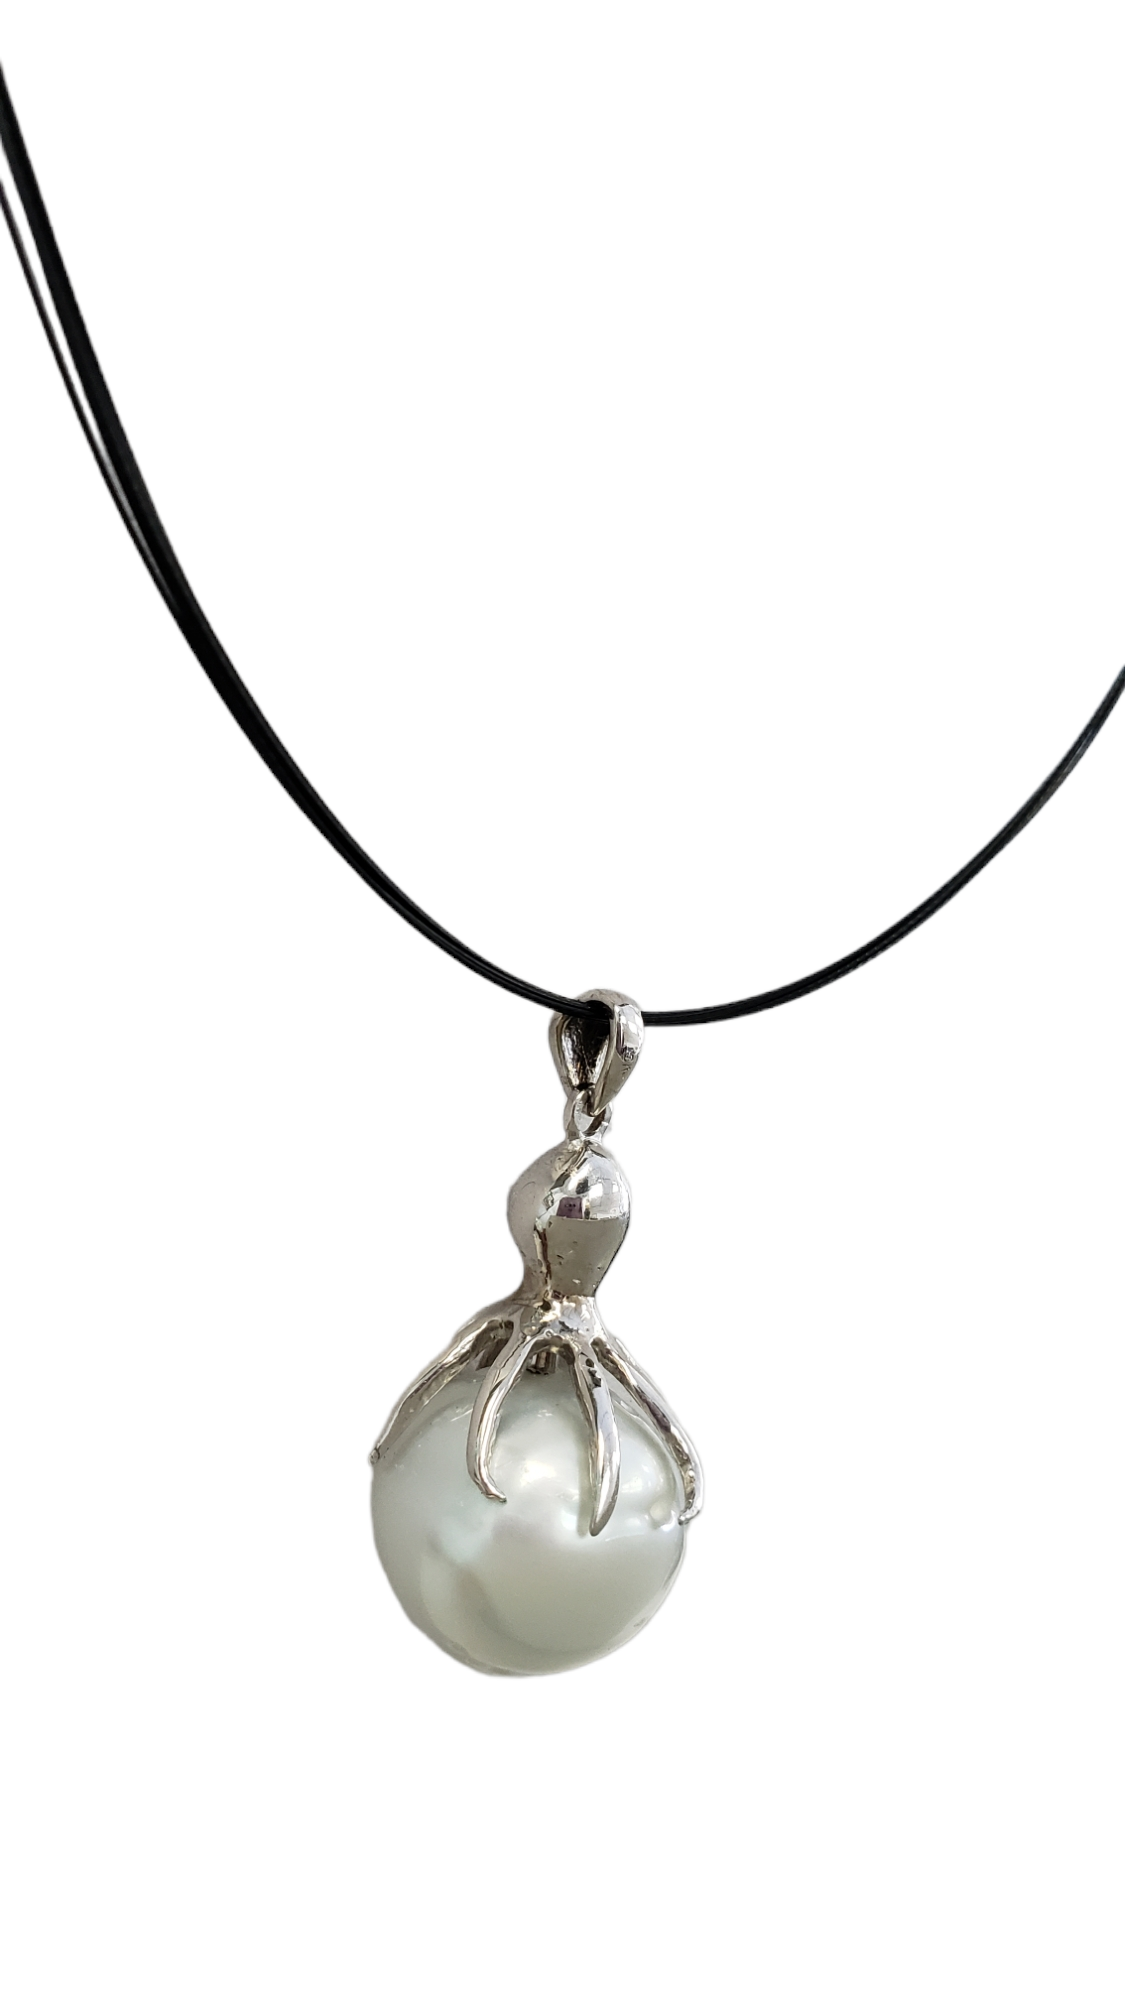 14K White Gold Octopus Holding South Sea White Pearl Pendant on Black Wire